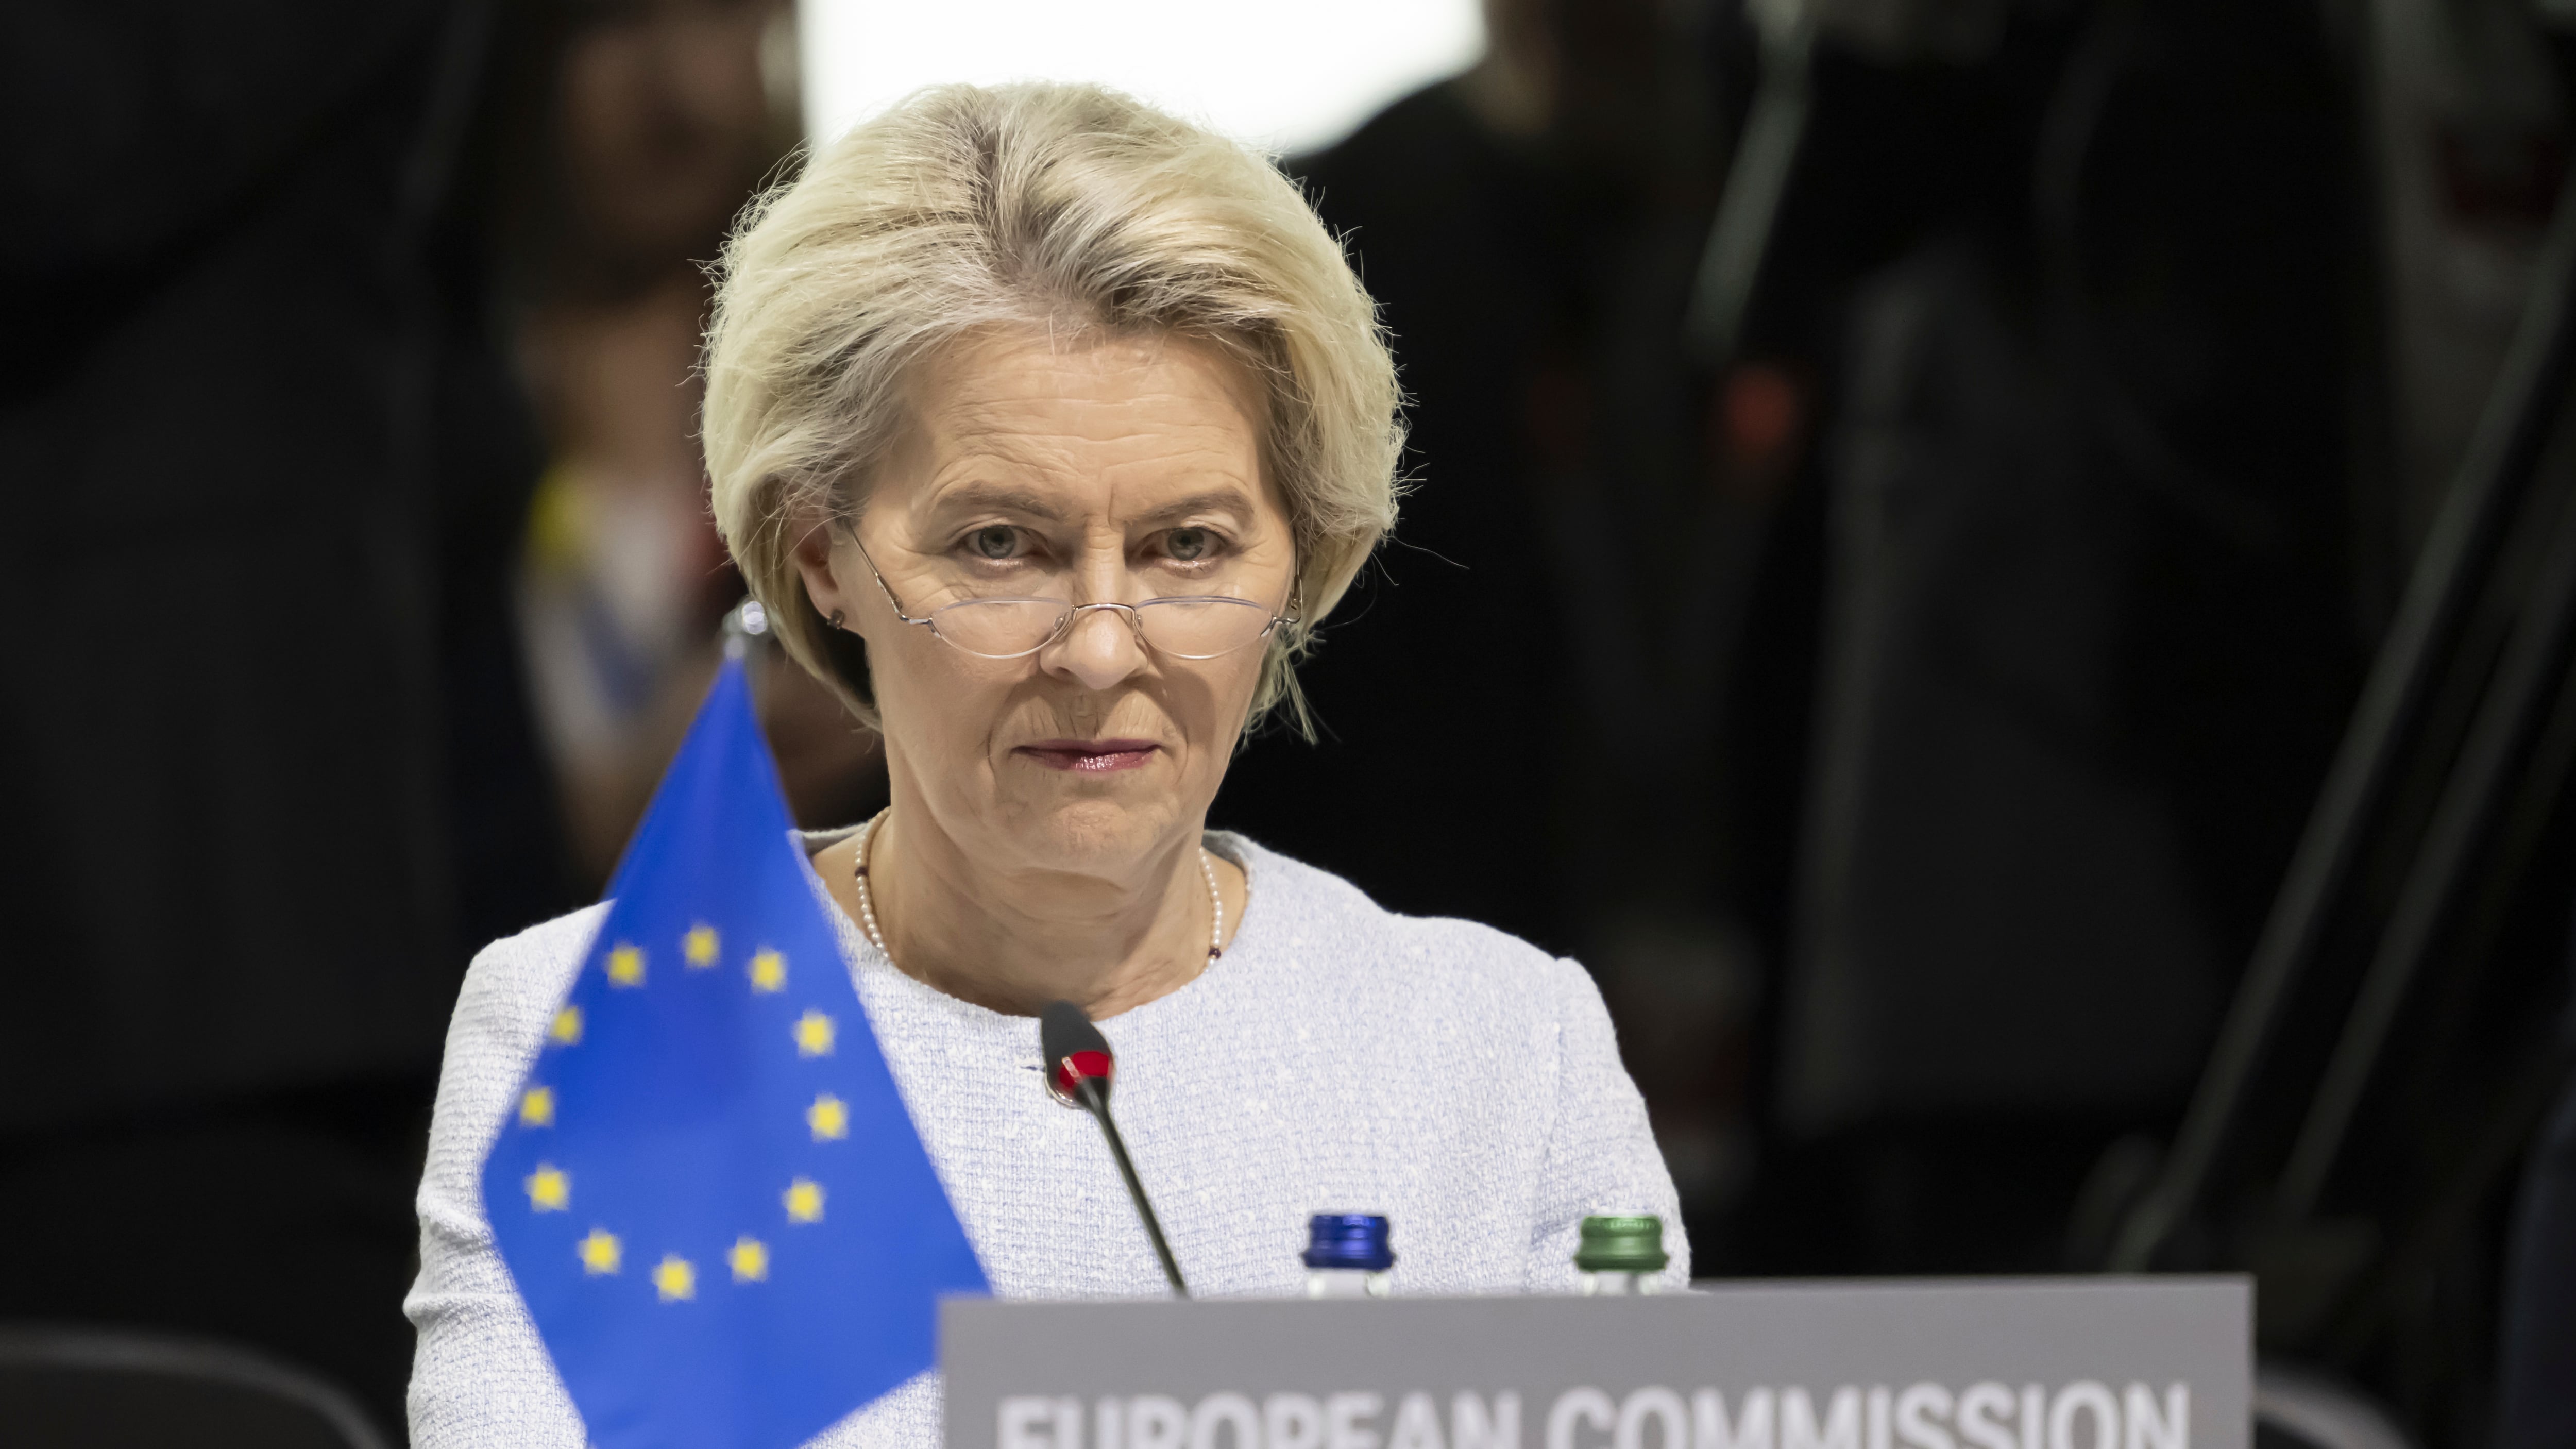 Ursula von der Leyen has been approved for a second term as the European Commission president (Alessandro Della Valle/Keystone via AP)